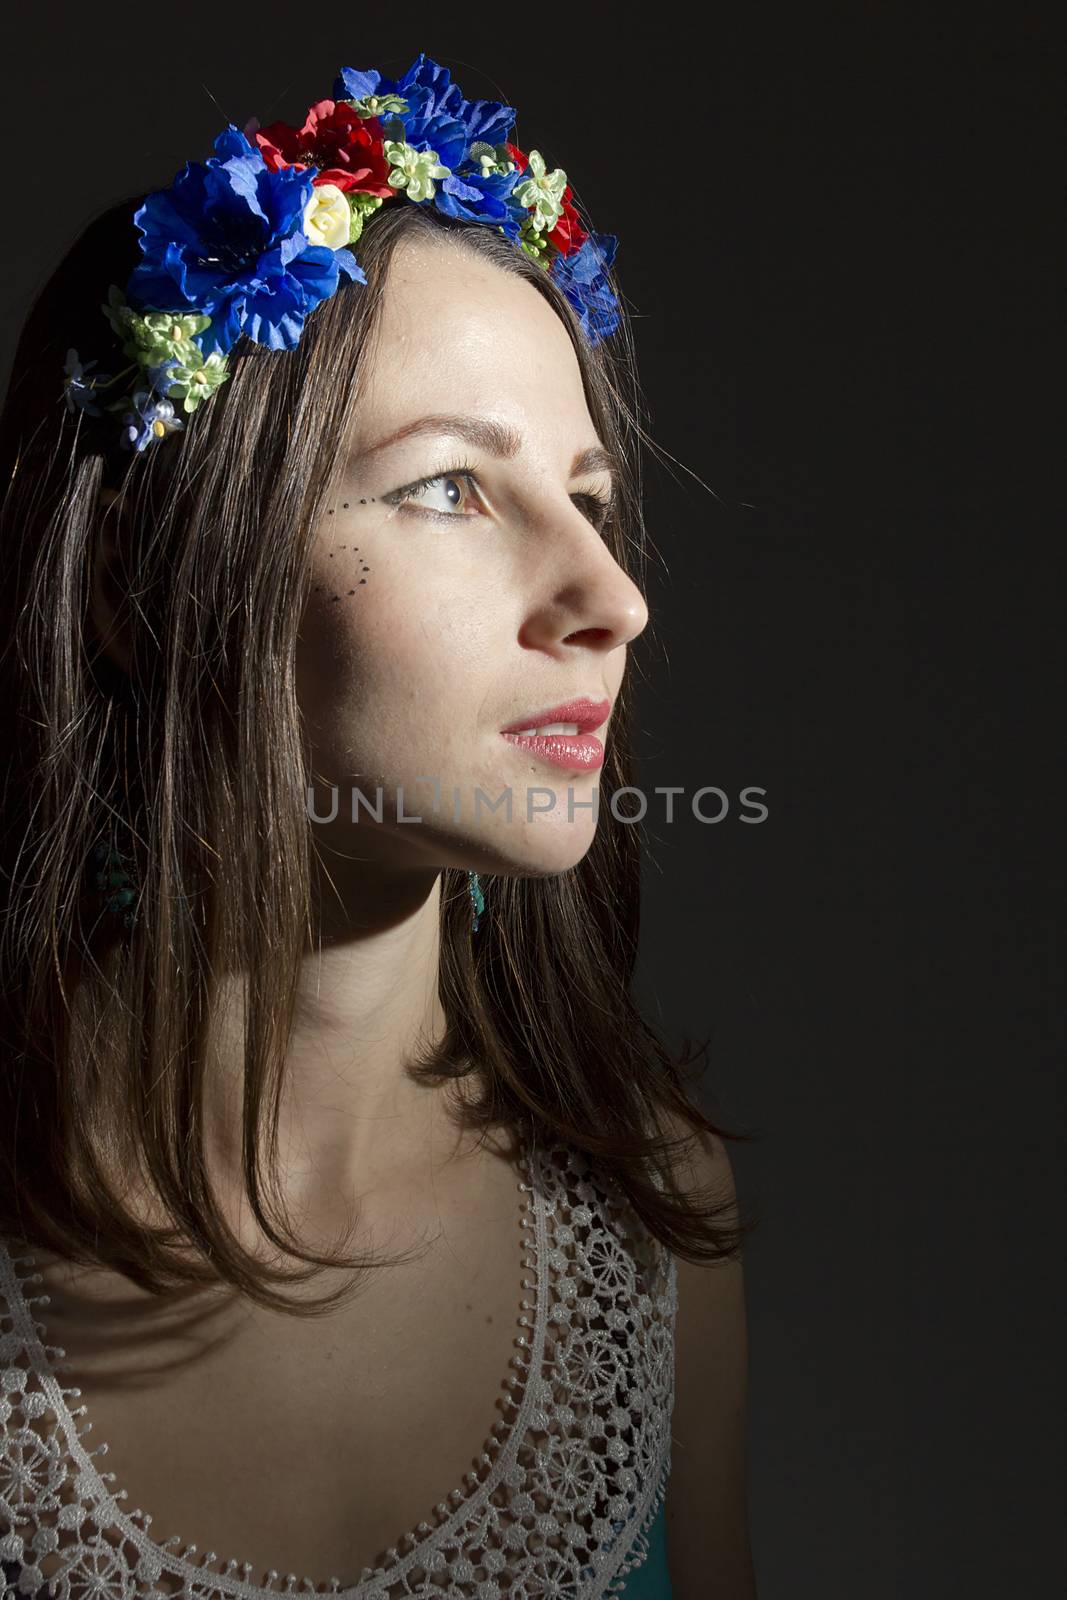 Portrait of a young woman in a wreath of flowers on a black background